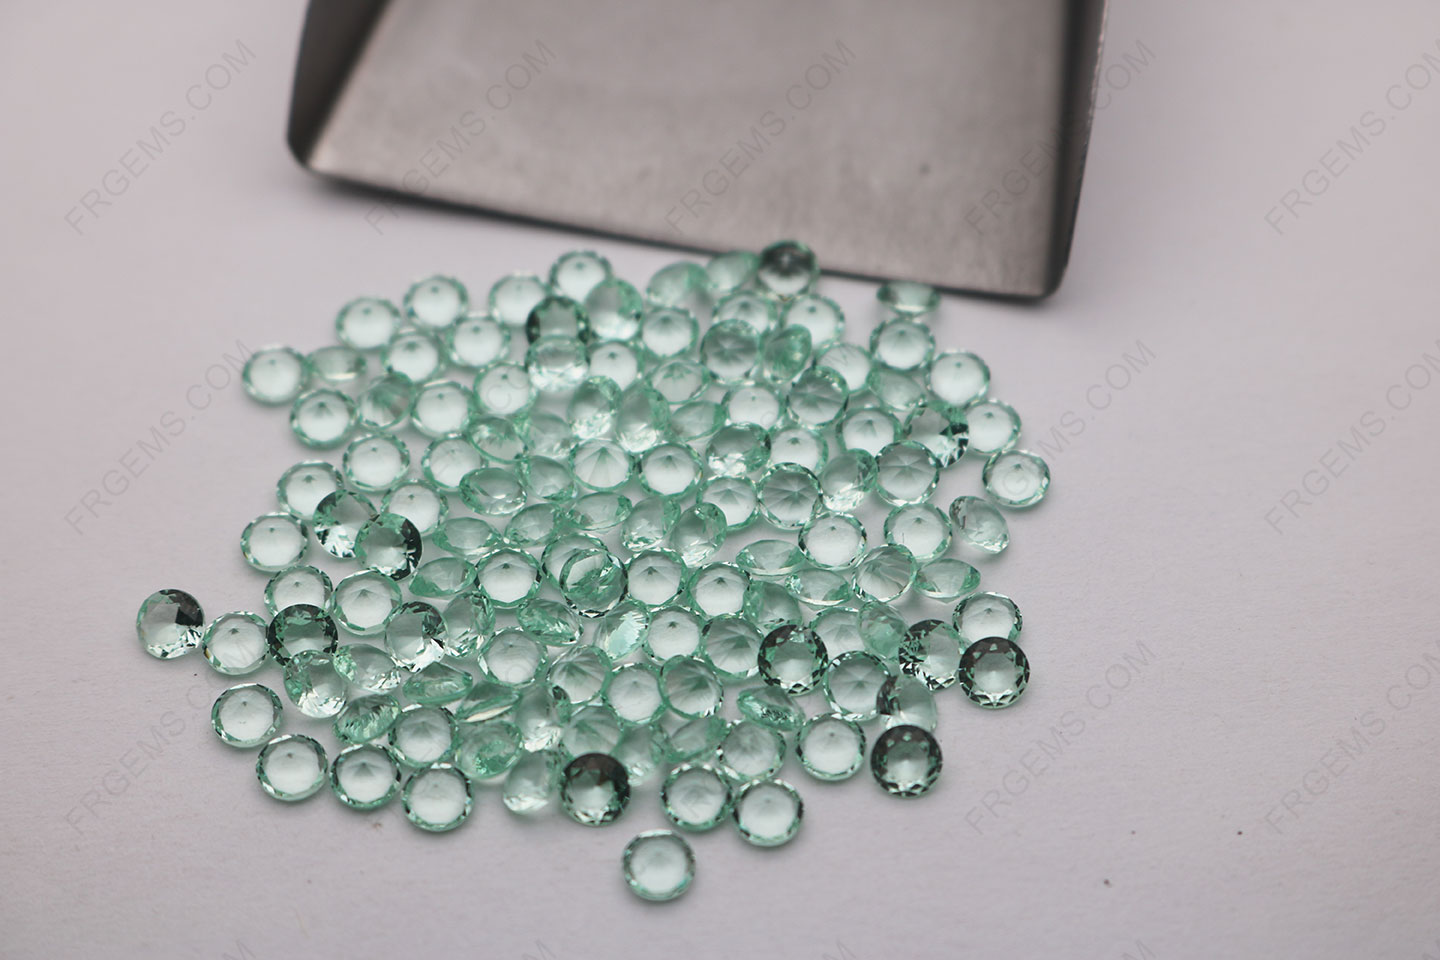 Glass Mint Green Tourmaline BE08# color Round shape Faceted 4mm Loose gemstones wholesale from China